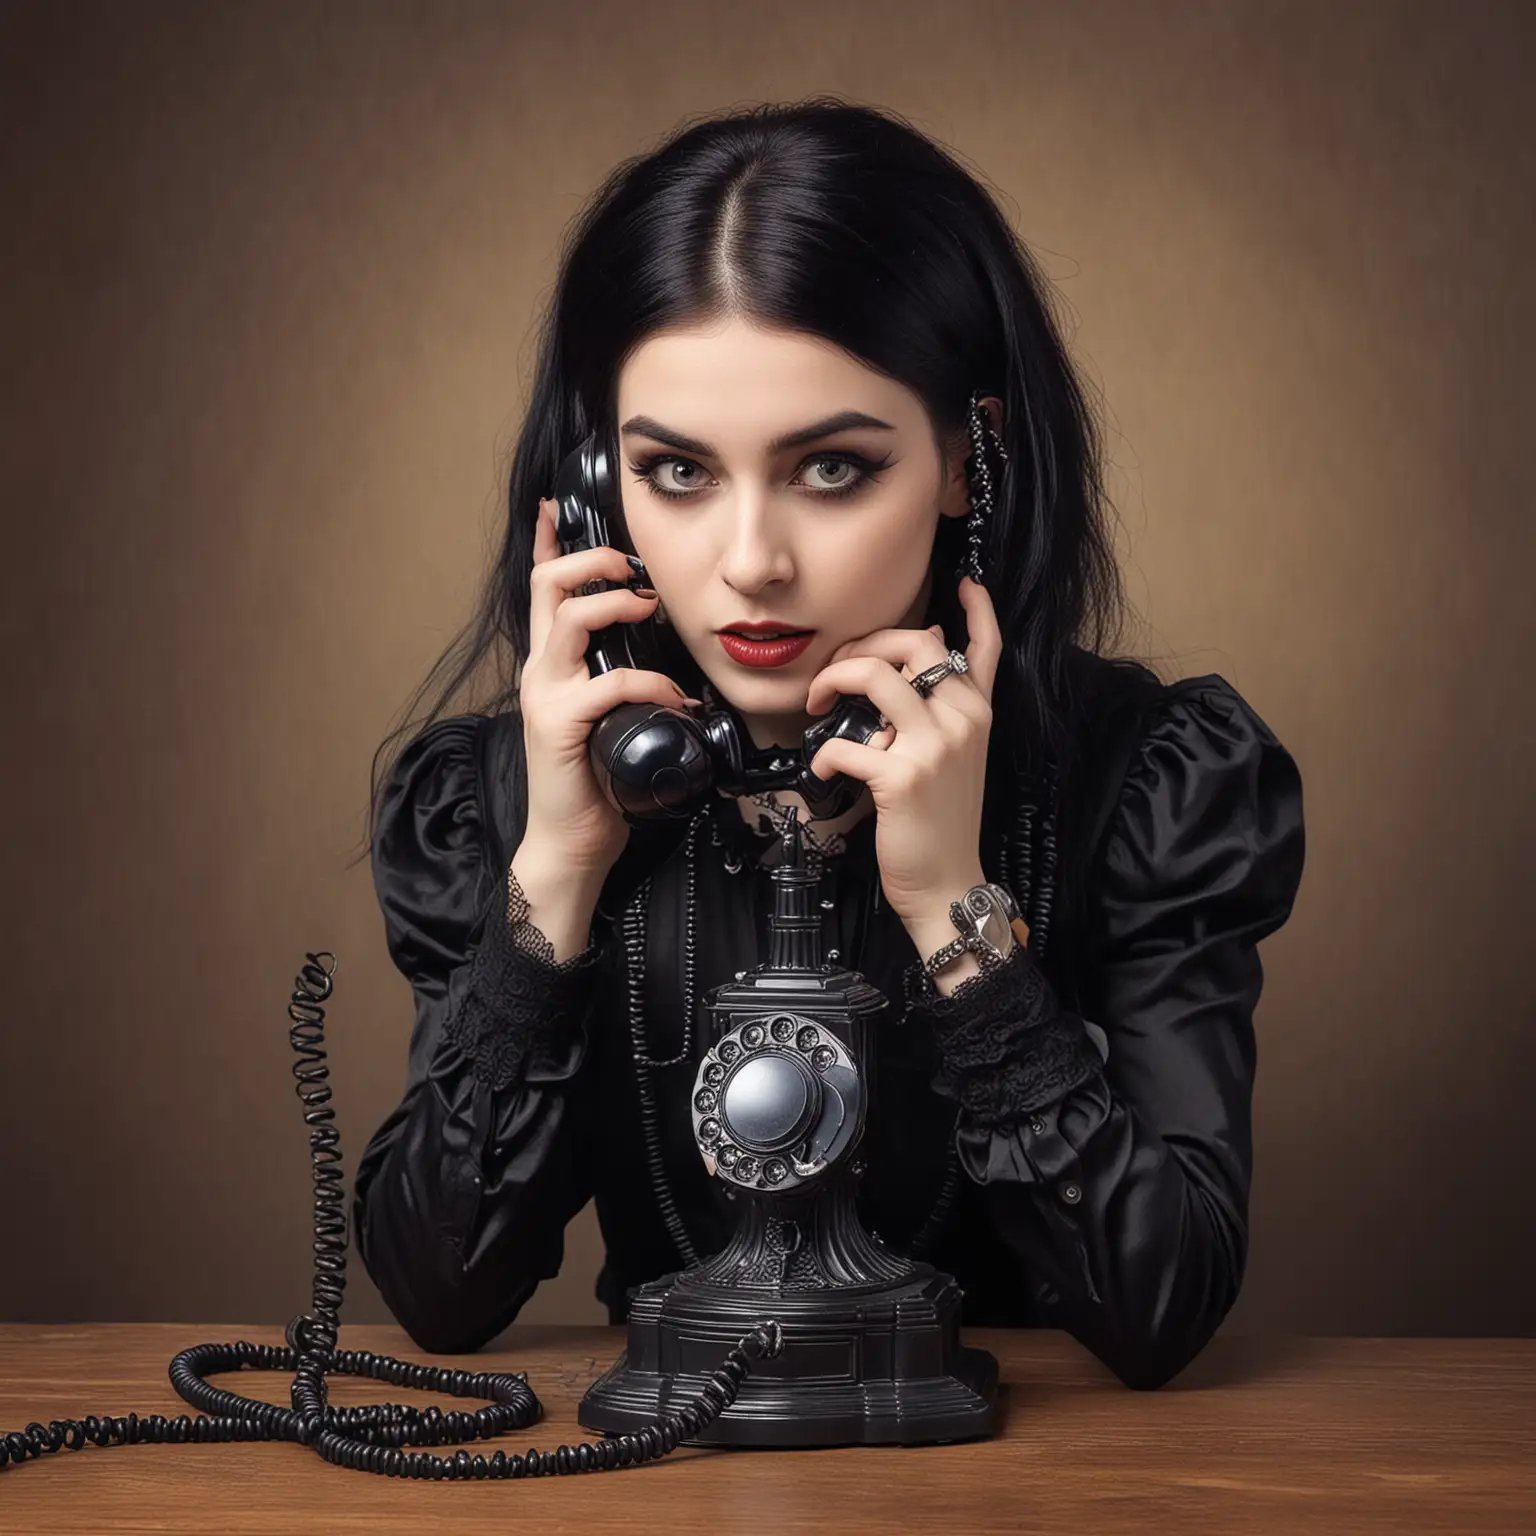 Goth girl talking on an antique telephone